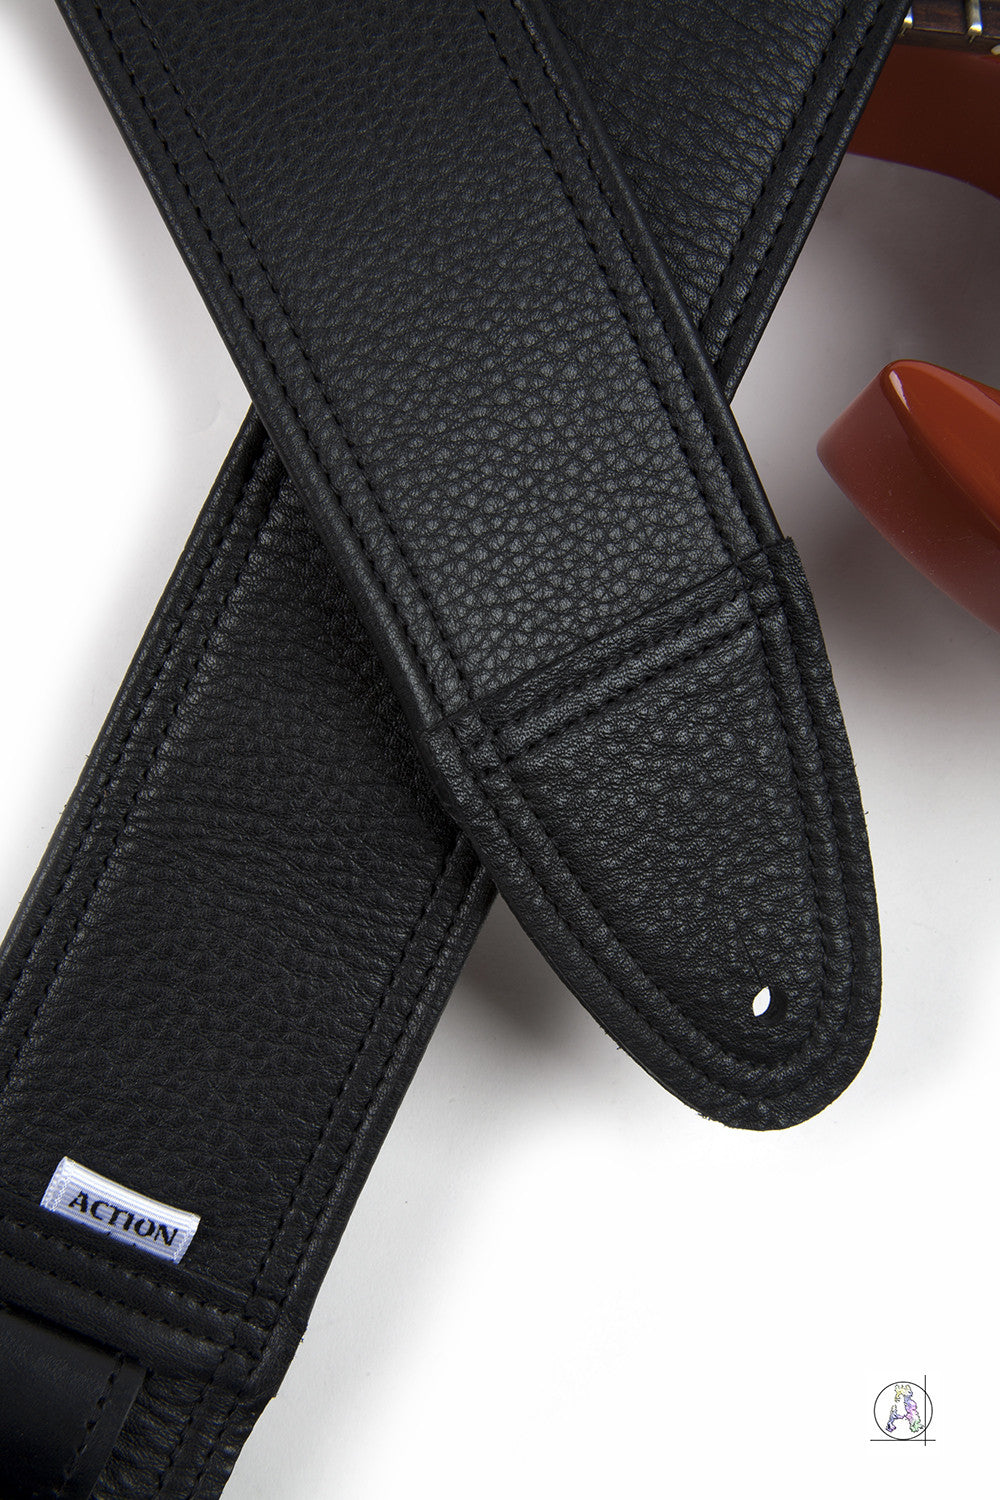 Simply Classy Black 100 Leather Guitar Strap